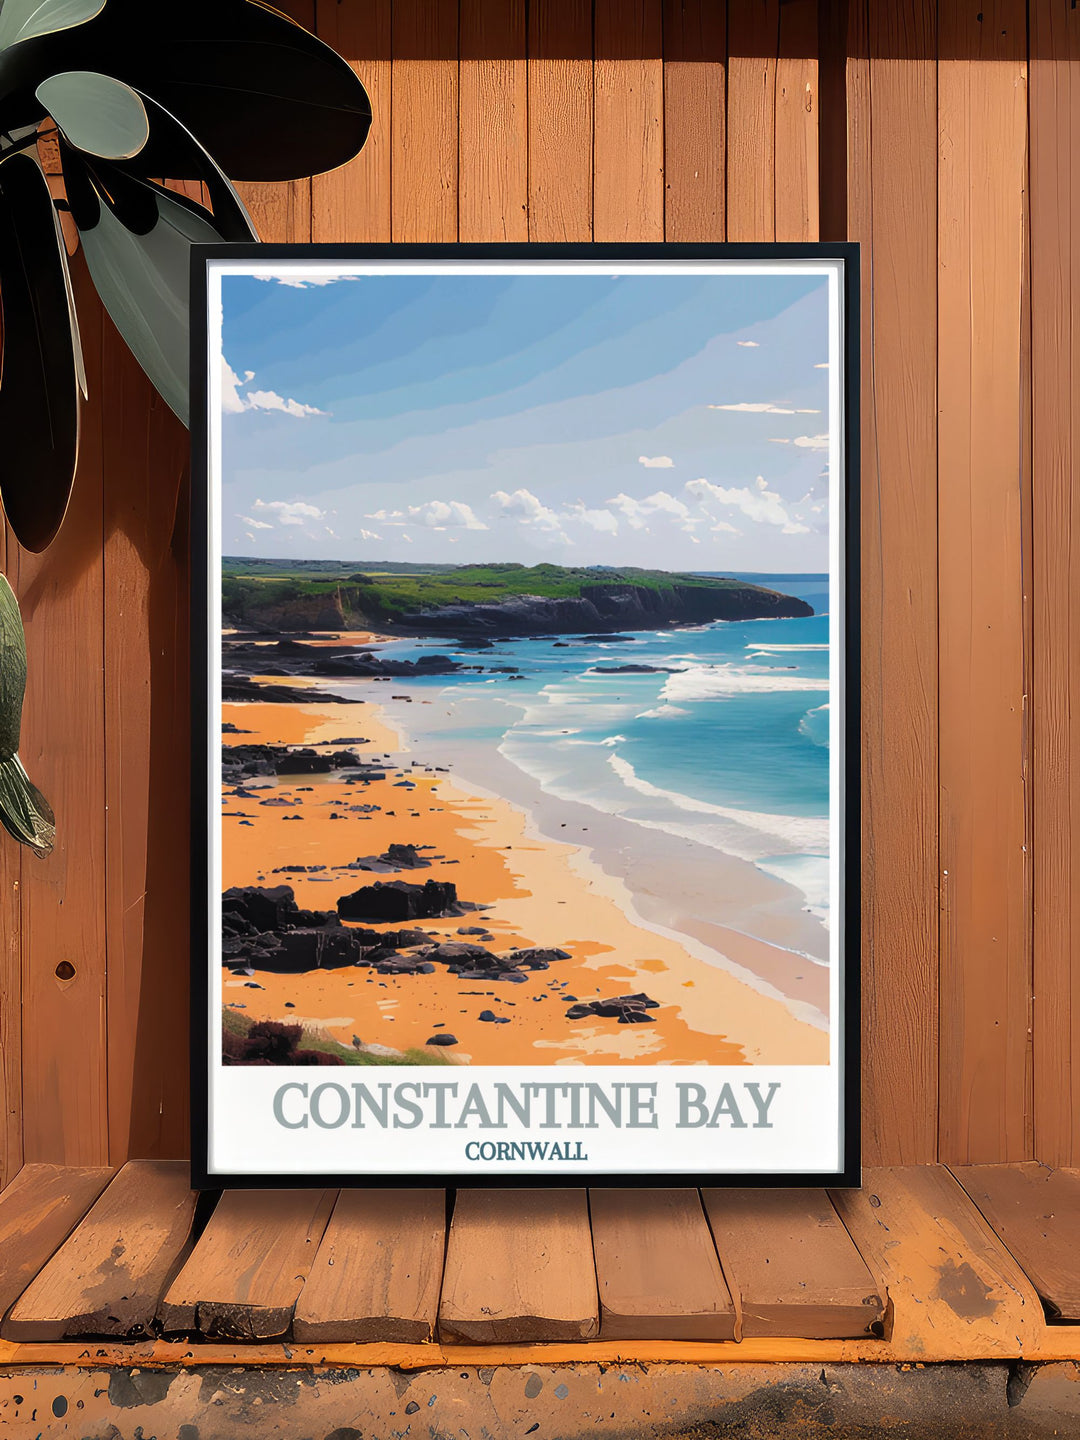 Explore the secluded beauty of Boobys Bay in Cornwall, England, where fewer crowds and challenging waves offer a perfect spot for surfers seeking adventure. The serene environment and natural rock pools provide a tranquil escape from the hustle.